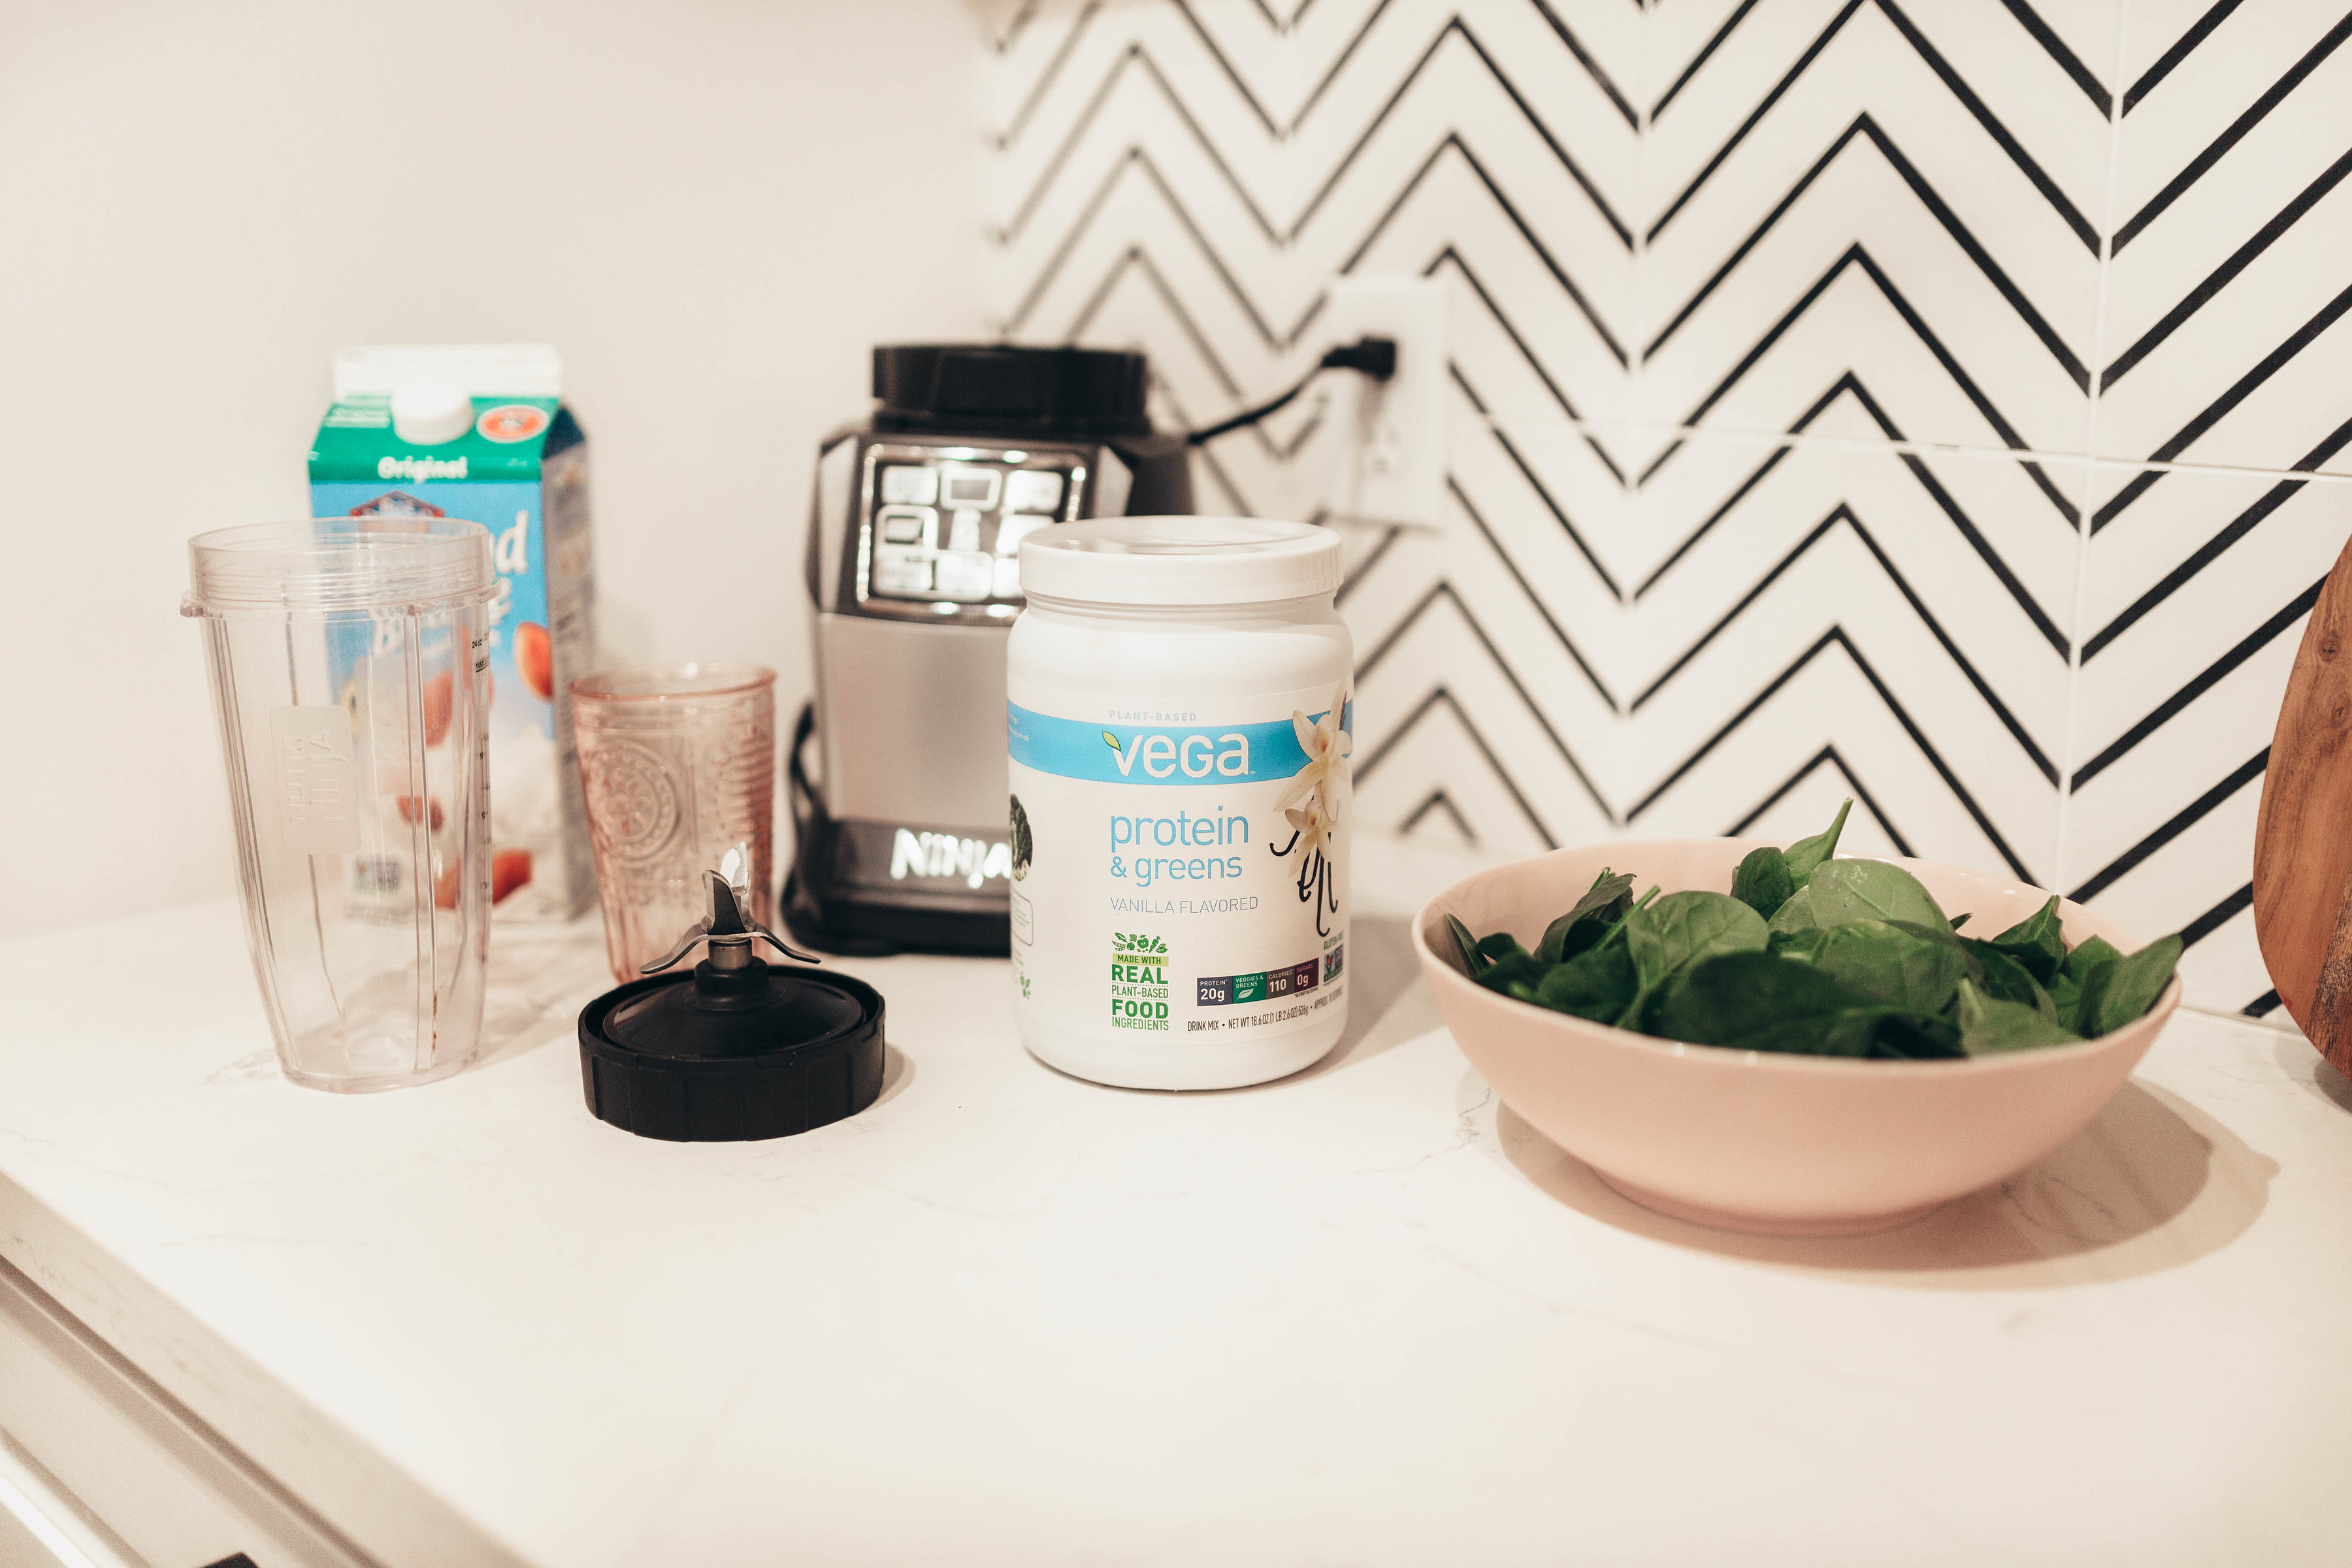 Ashley Zeal from Two Peas in a Prada shares her favorite plant-based protein shake recipe. In partnership with Healthier Together at Walmart. 